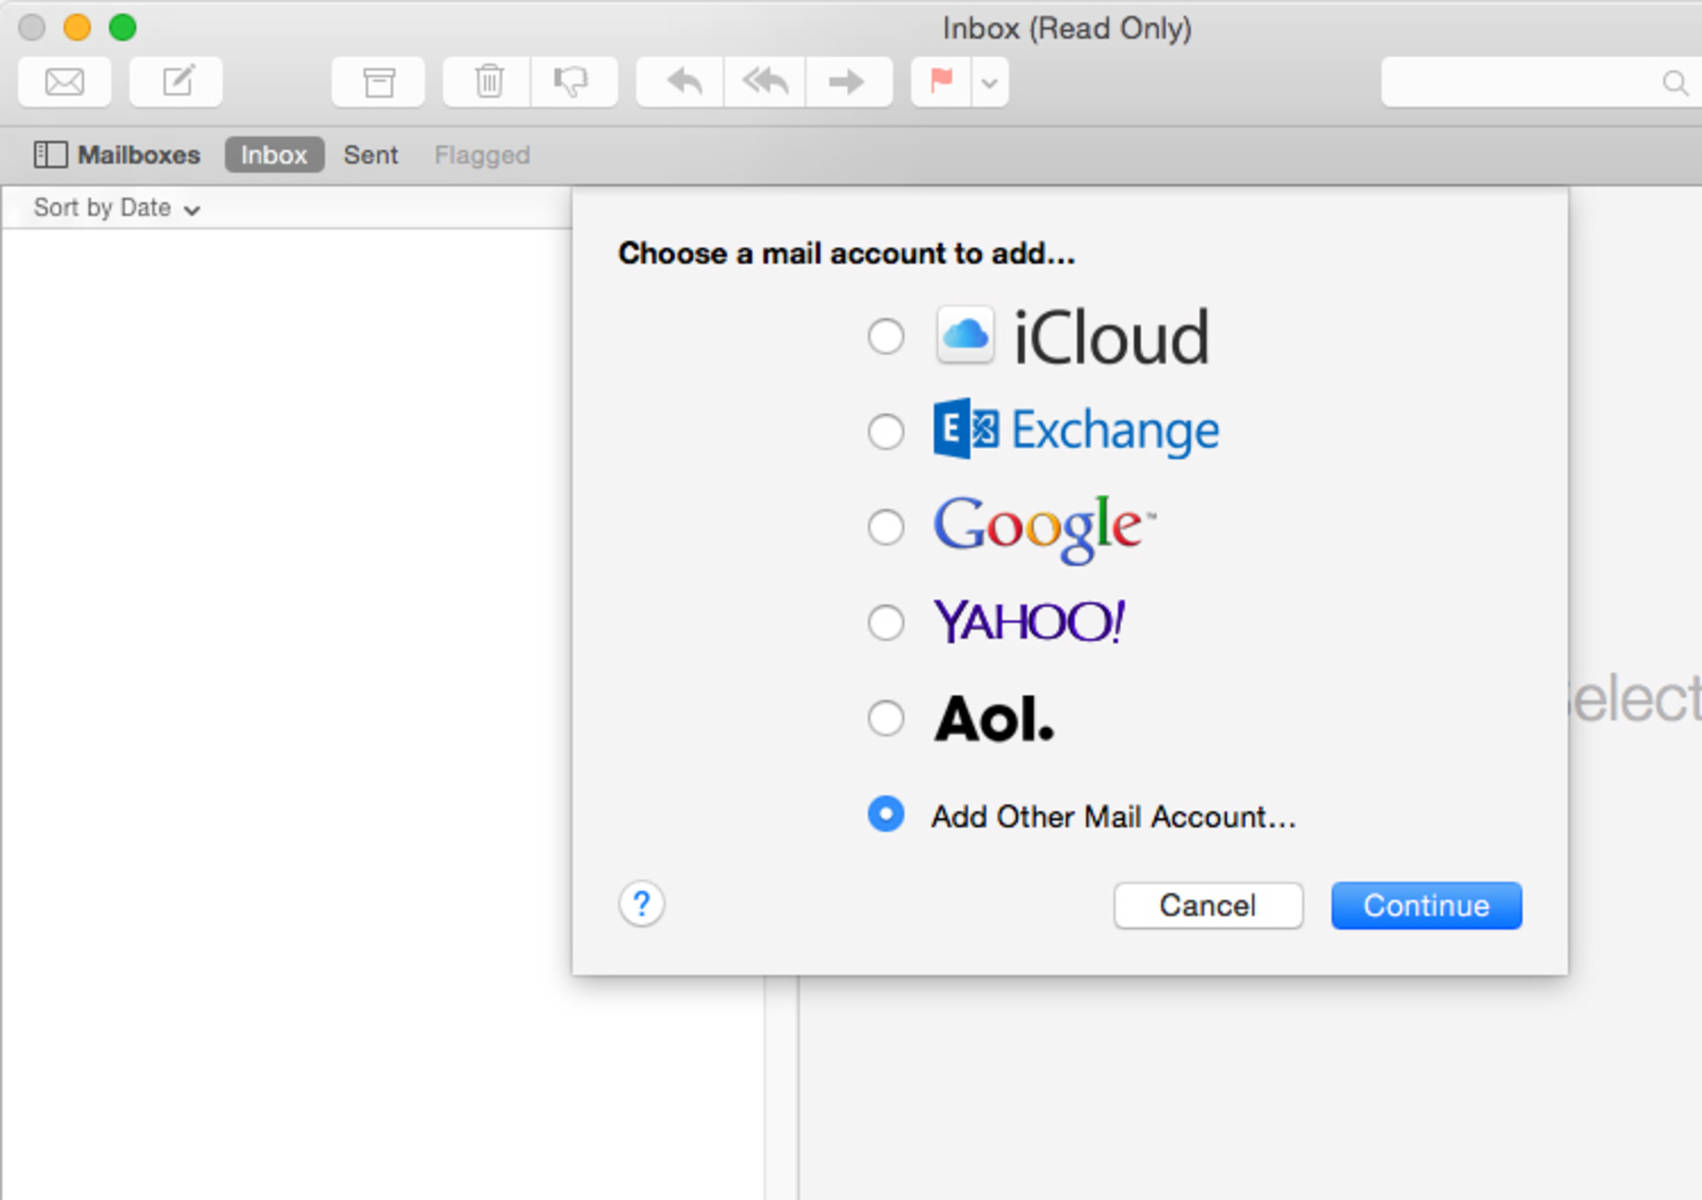 Step 1 » If this is your first time setting up an account in Mail, choose "Add Other Mail Account" from the setup menu and click Continue. If you already use Mail, click "Add Account" from the File menu.